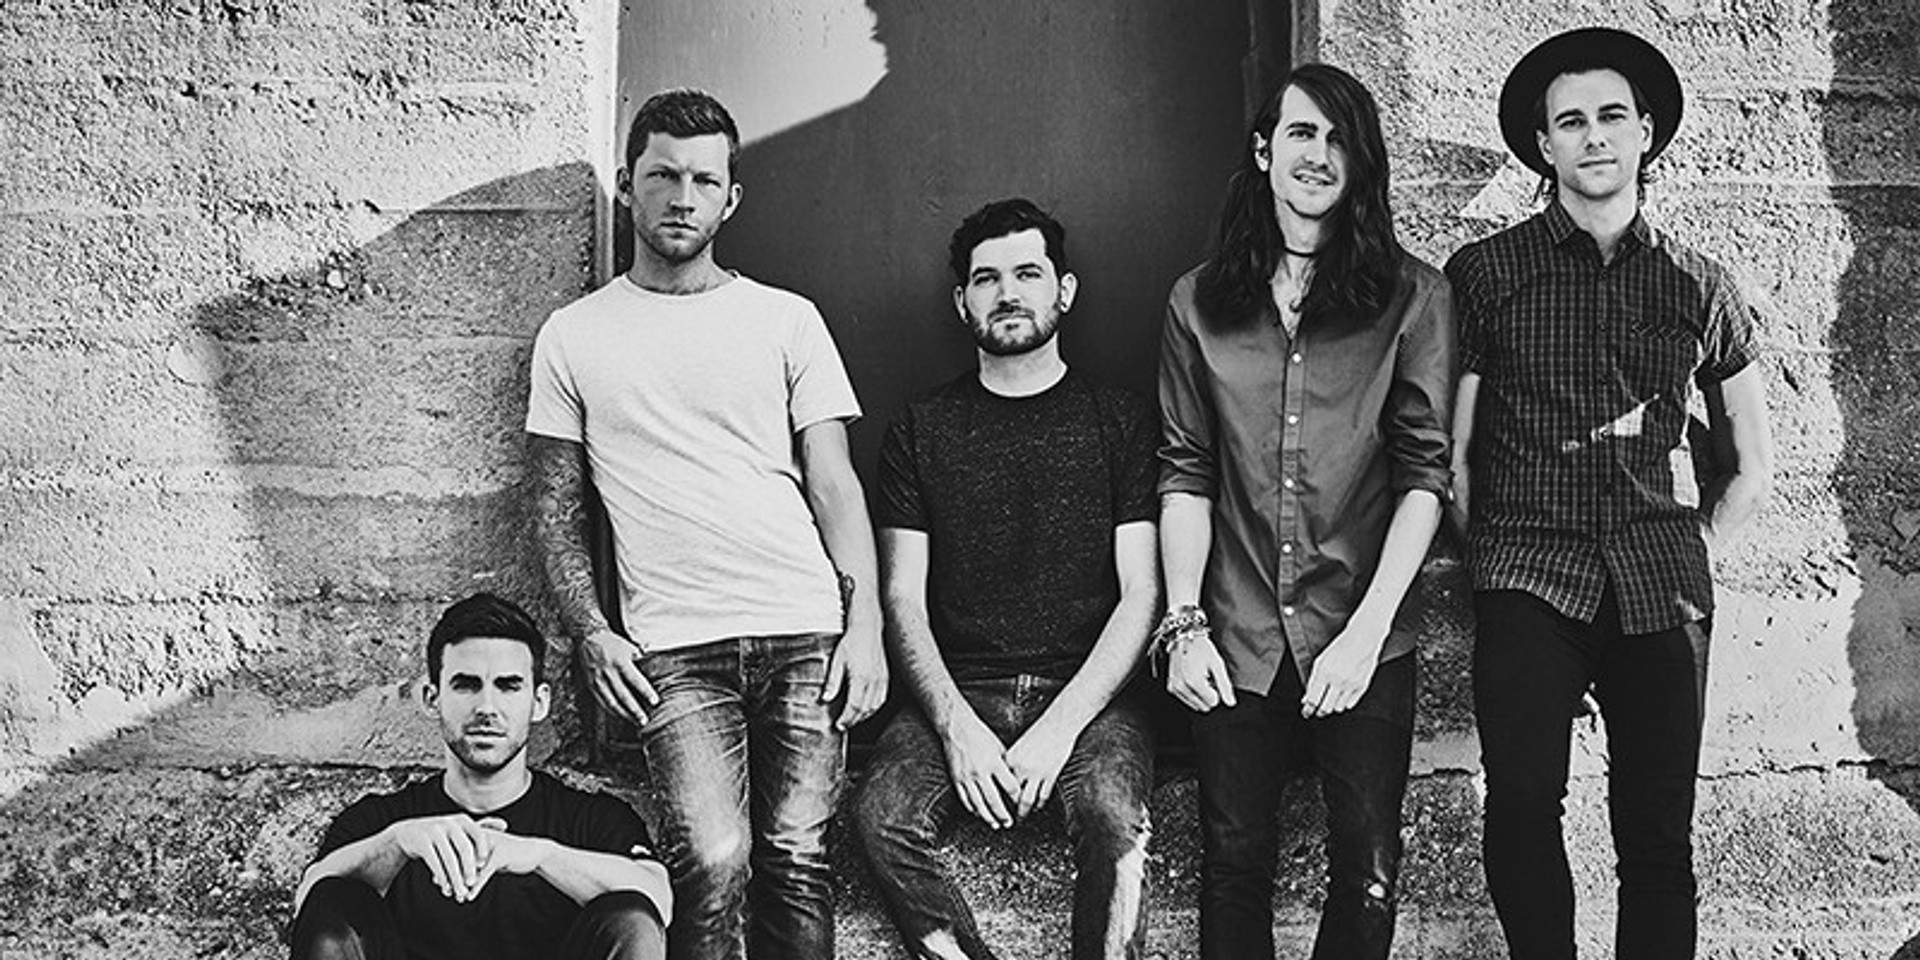 DON'T MISS: Mayday Parade, Blessthefall and BTS in Manila